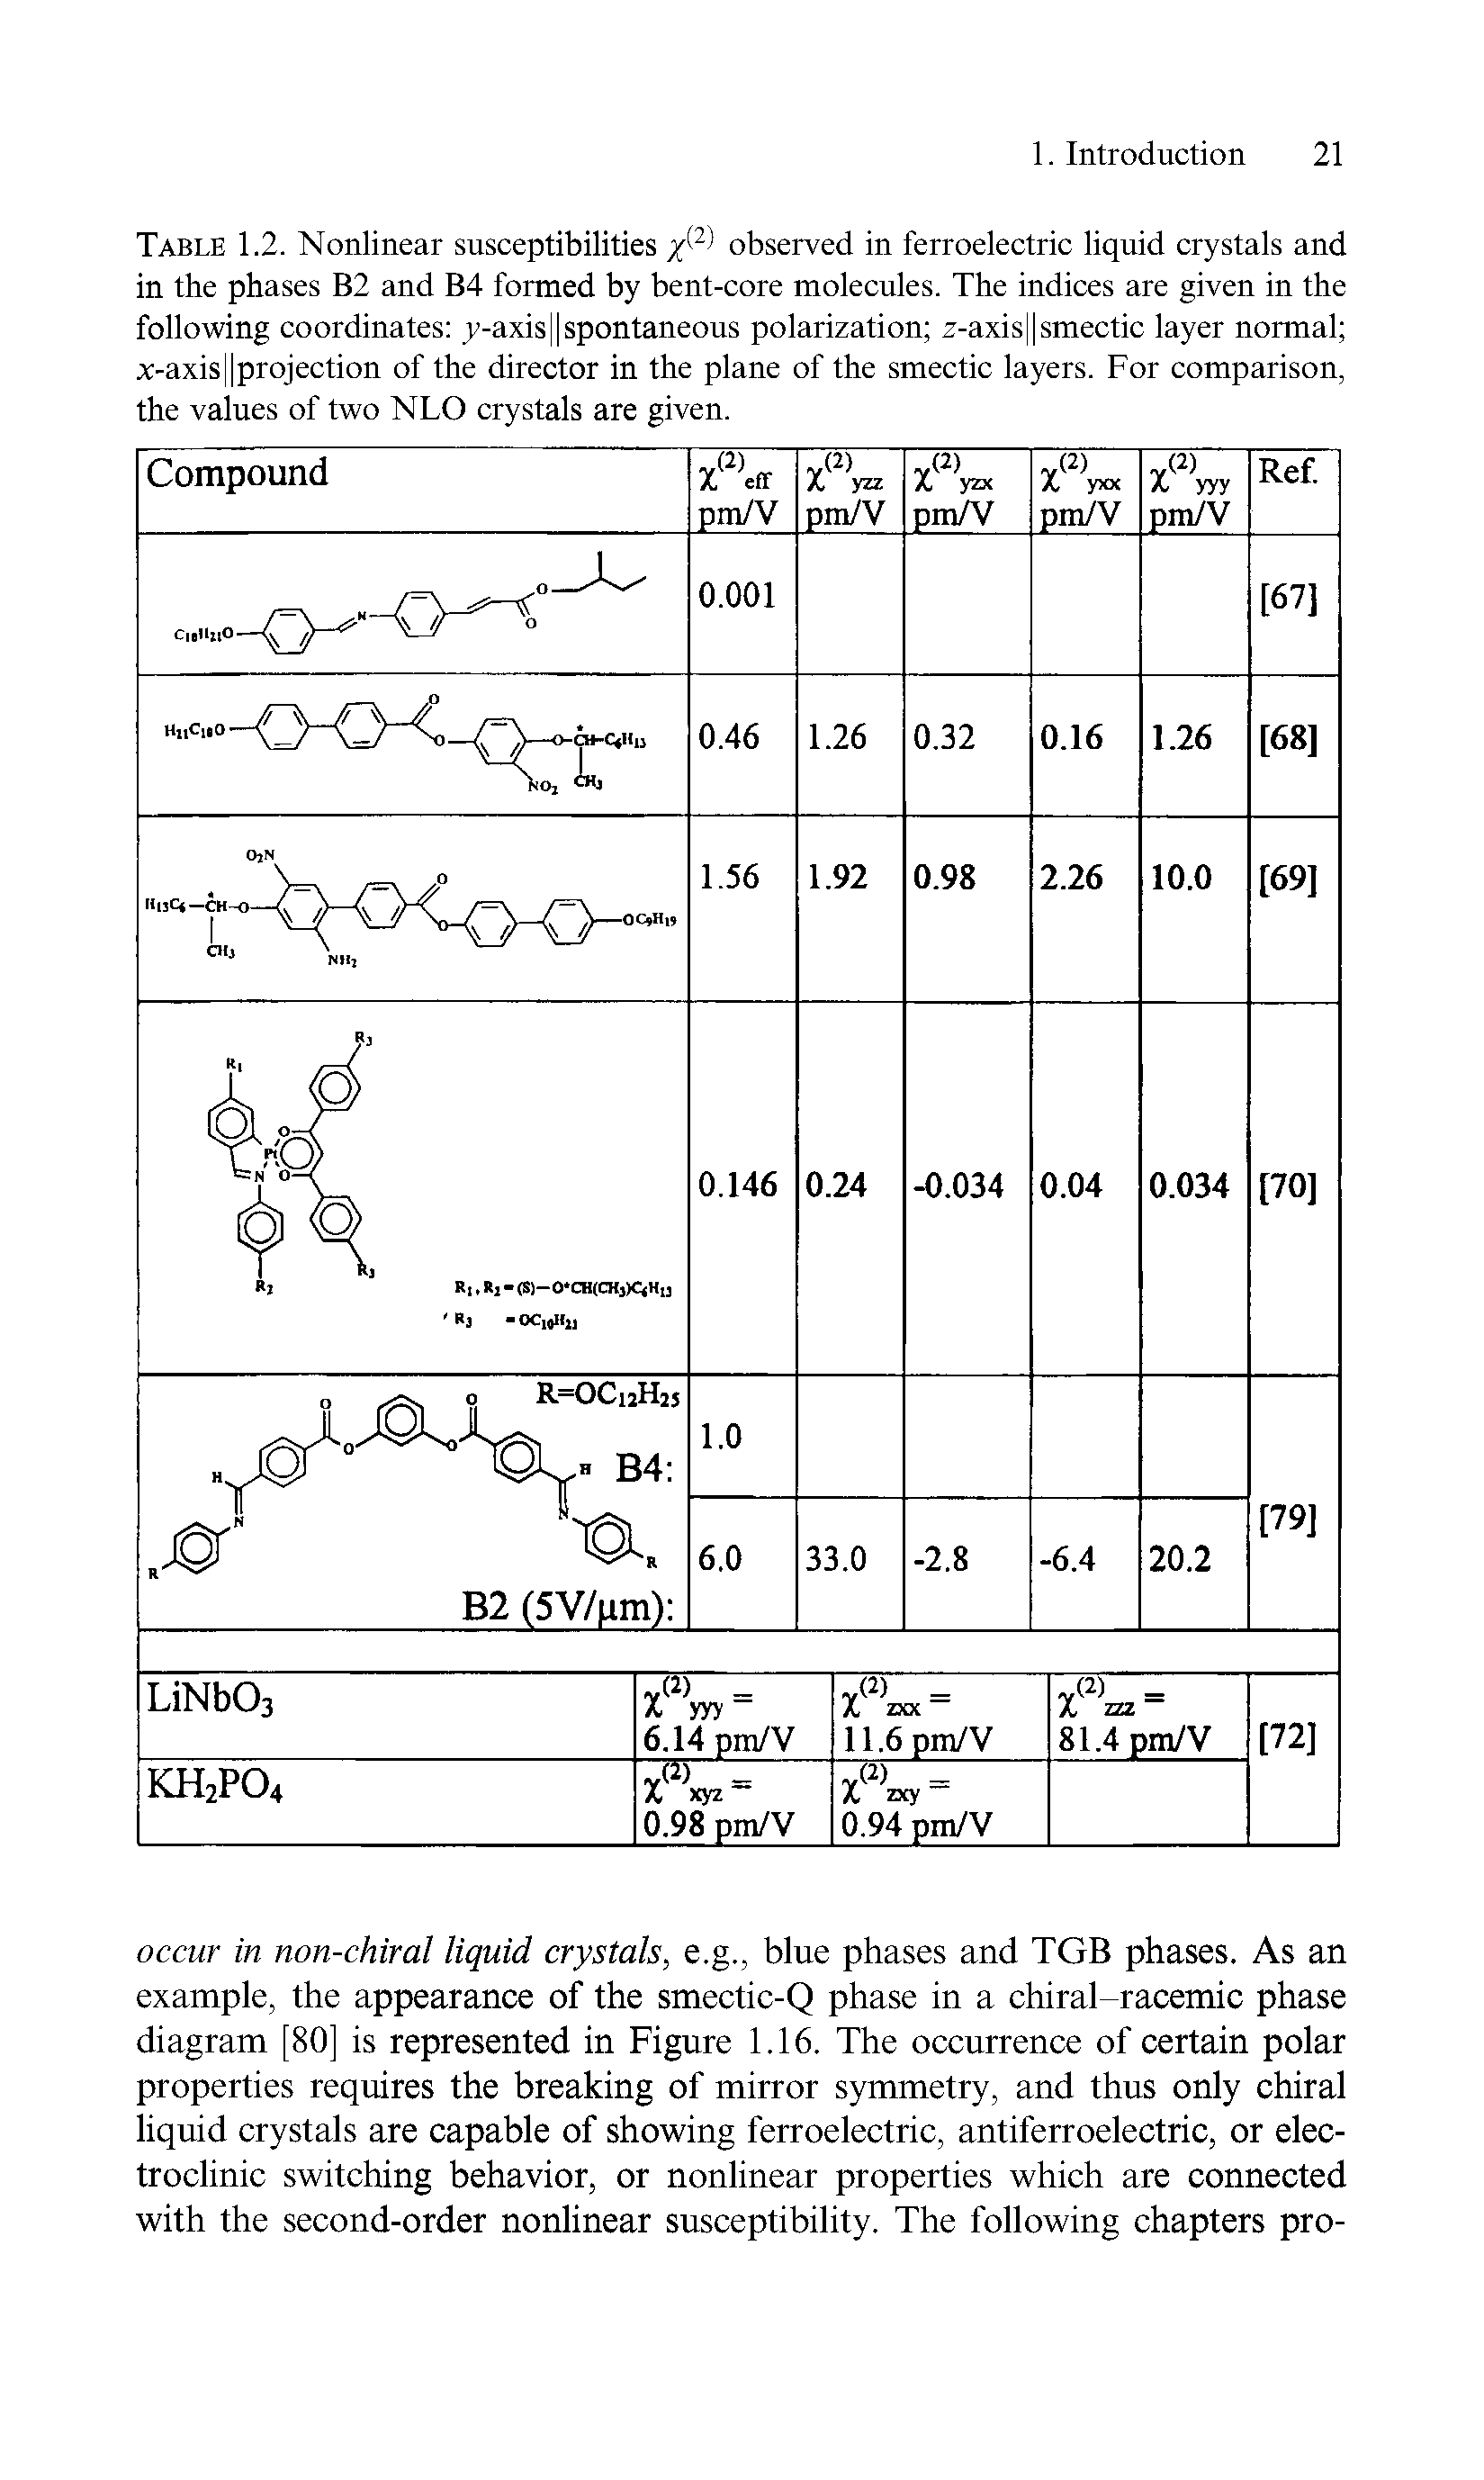 Table 1.2. Nonlinear susceptibilities observed in ferroelectric liquid crystals and in the phases B2 and B4 formed by bent-core molecules. The indices are given in the following coordinates y-axis spontaneous polarization z-axis smectic layer normal x-axis projection of the director in the plane of the smectic layers. For comparison, the values of two NLO crystals are given.